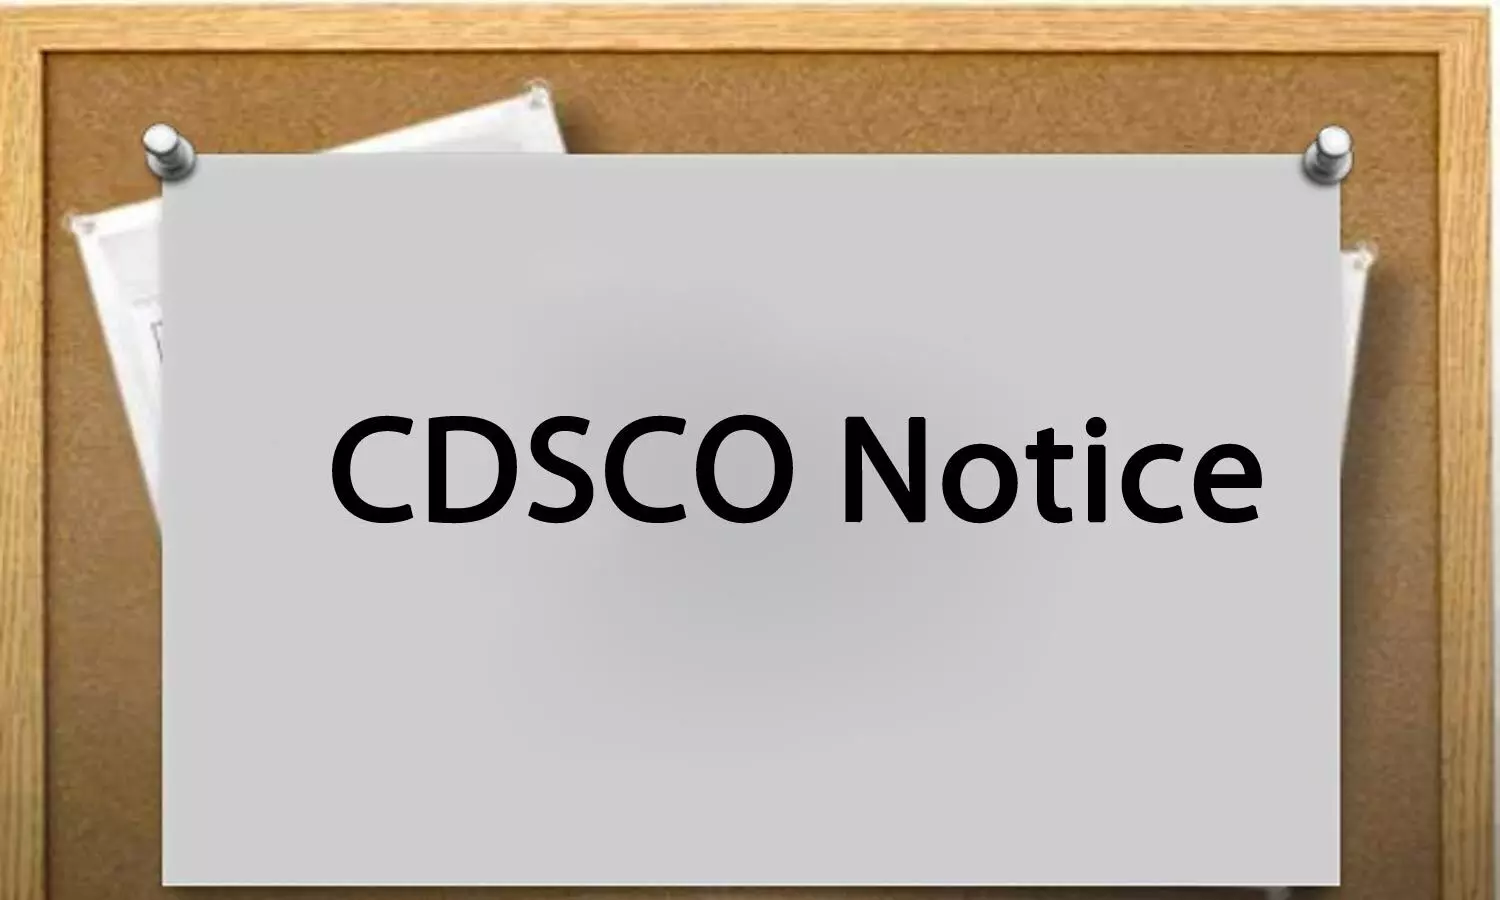 How to register medical devices? CDSCO issues guidelines